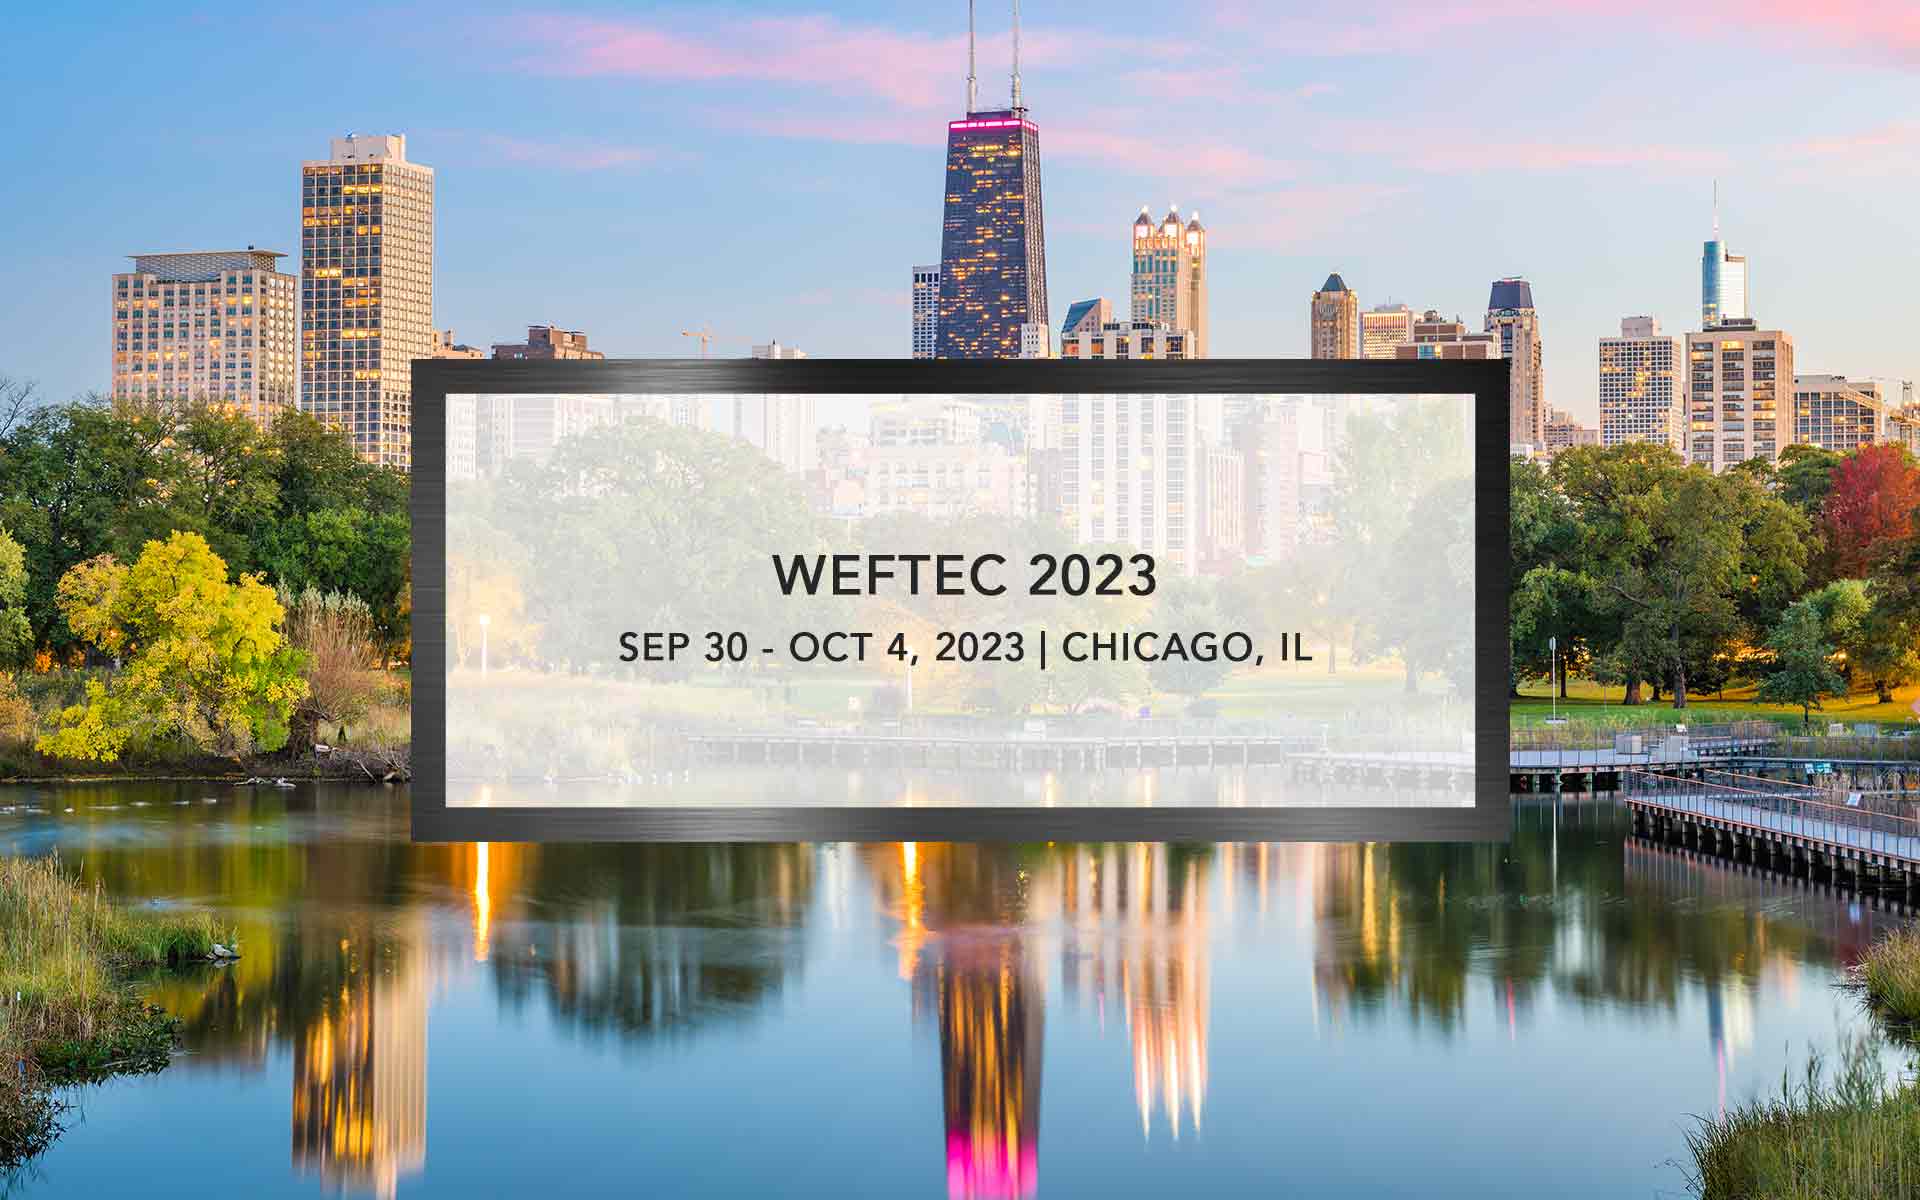 Exhibition Booth Constructor Company in WEFTEC 2023 Chicago USA